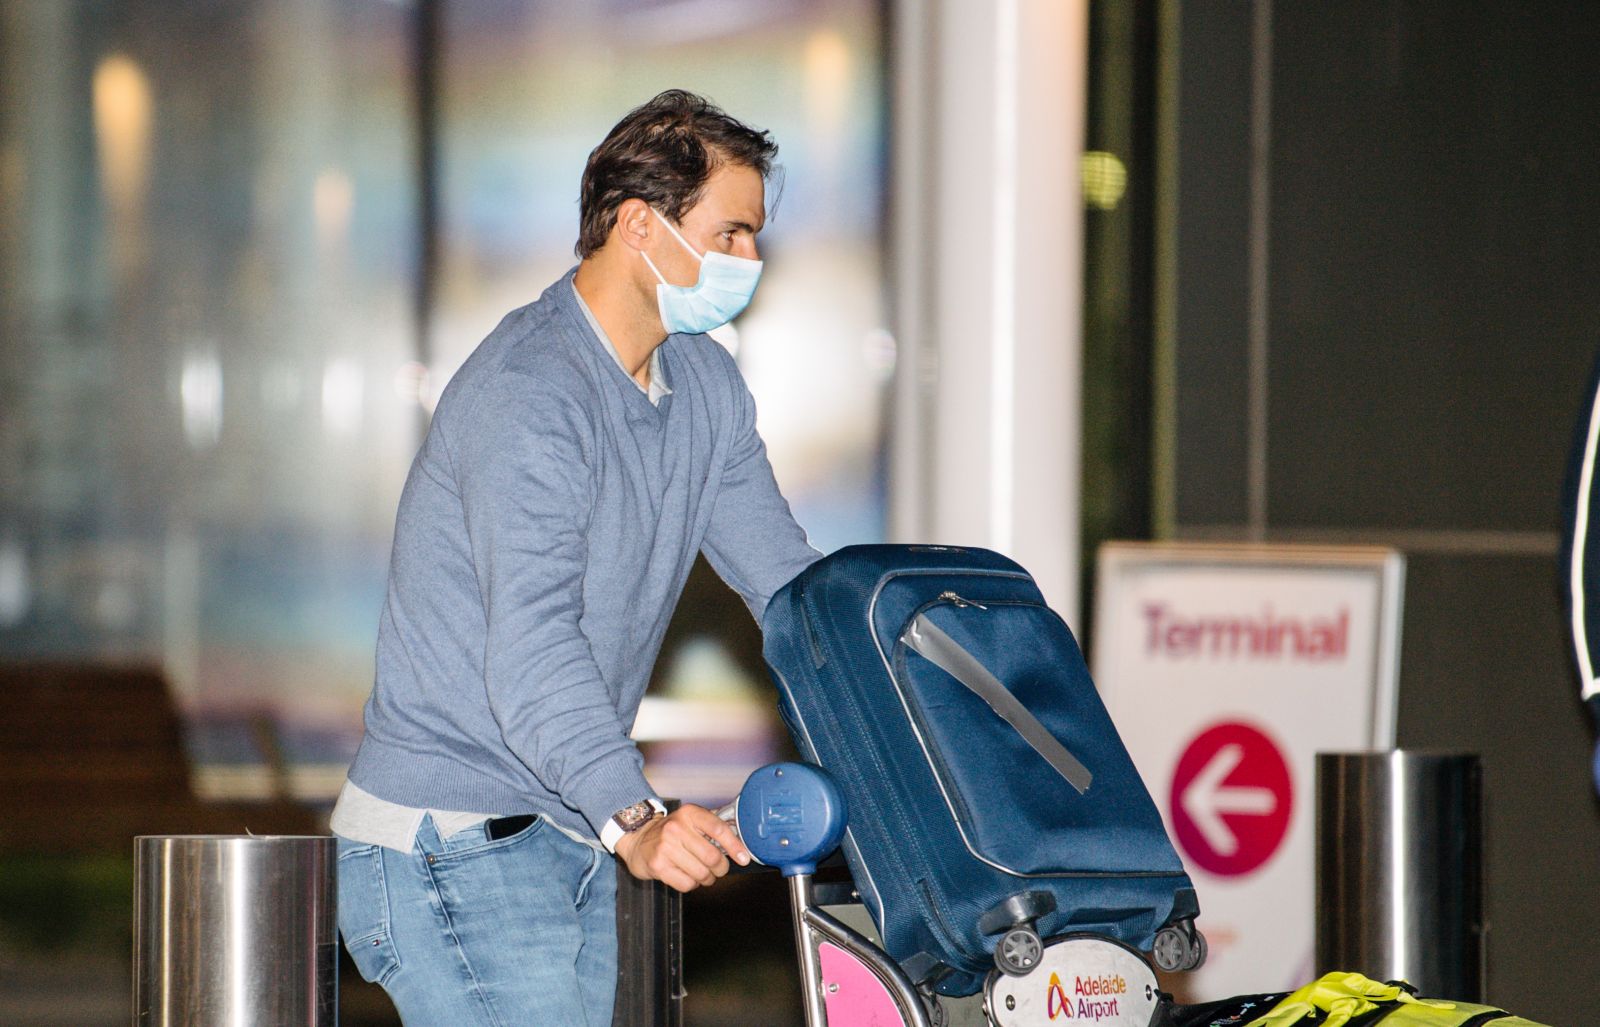 epa08936923 Rafael Nadal arrives at Adelaide Airport ahead of the Australian Open tennis tournament, Adelaide, Australia, 14 January 2021. Arriving players will serve a 14-day quarantine period ahead of the scheduled major set to get underway on 08 February.  EPA/MORGAN SETTE NO ARCHIVING AUSTRALIA AND NEW ZEALAND OUT